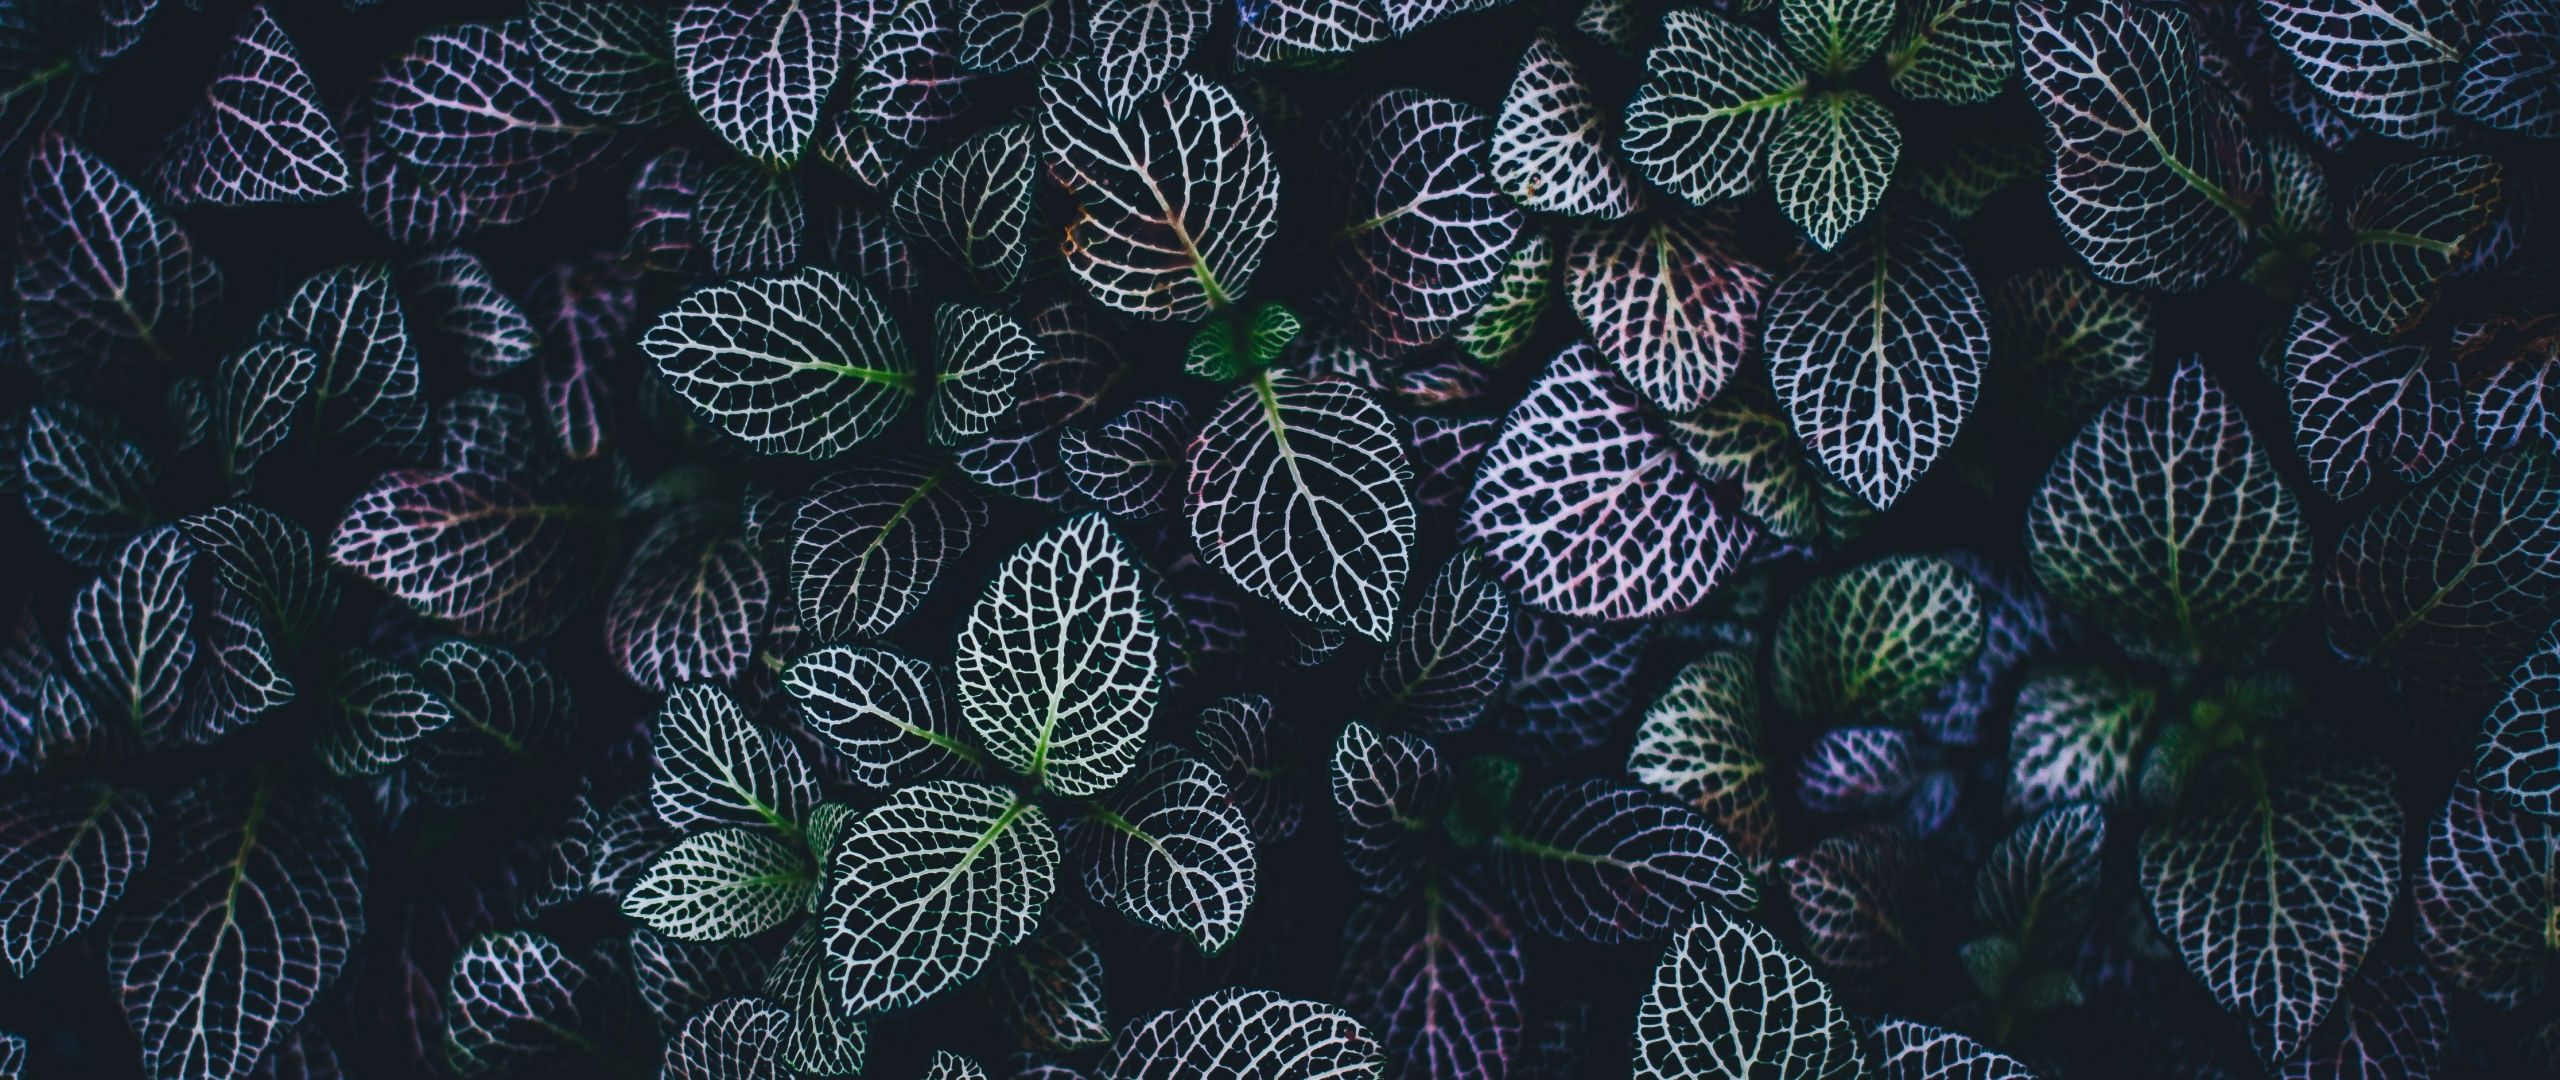 A field of green leaves with purple edges - Botanical